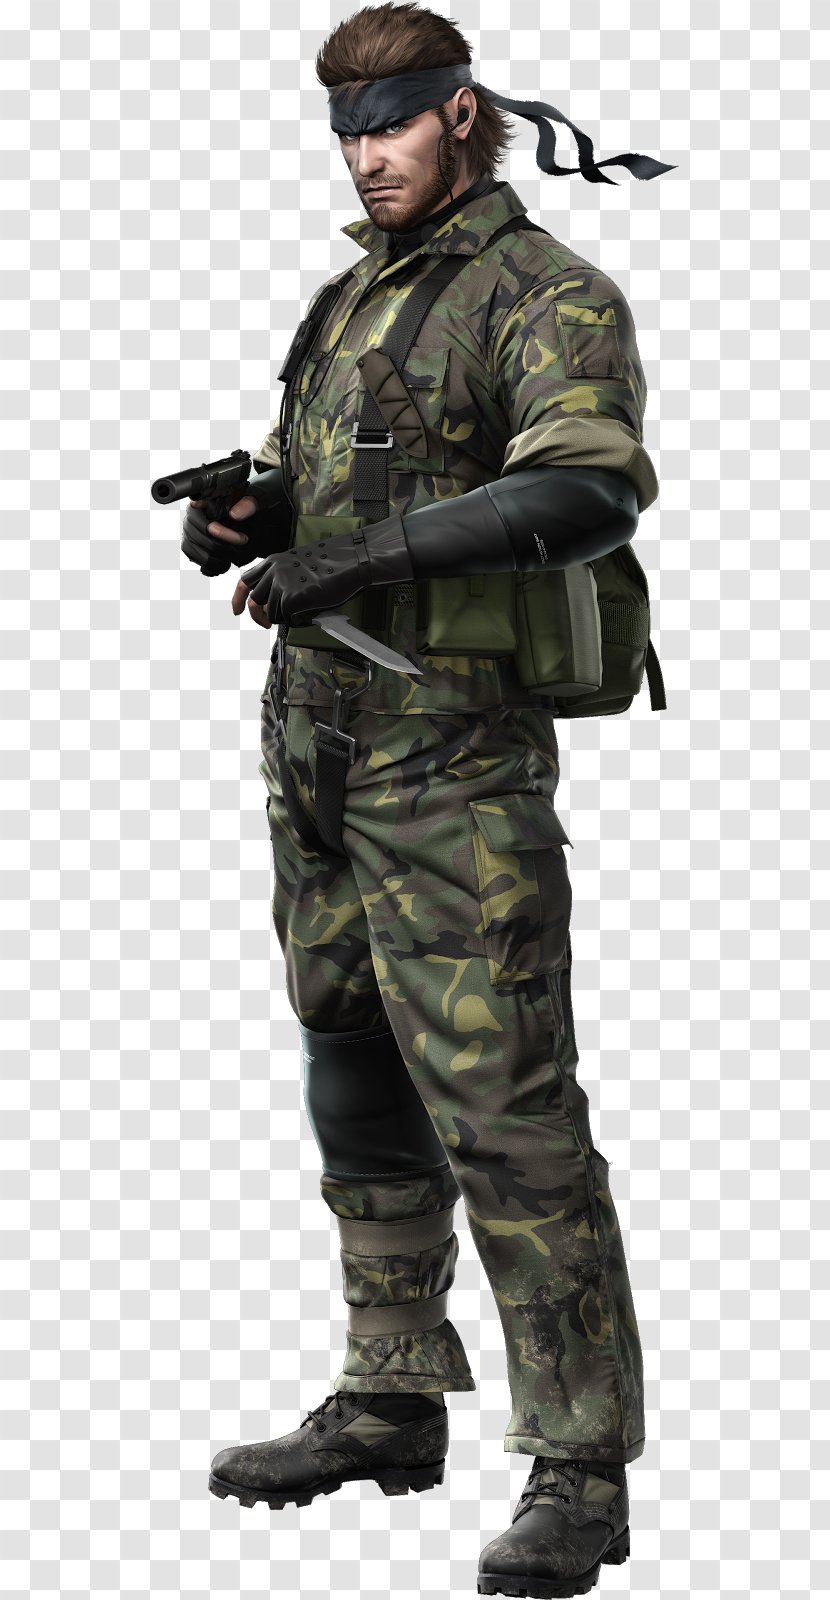 Metal Gear Solid 3: Snake Eater 2: V: The Phantom Pain Solid: Twin Snakes - Military Officer - Big Pants Transparent PNG